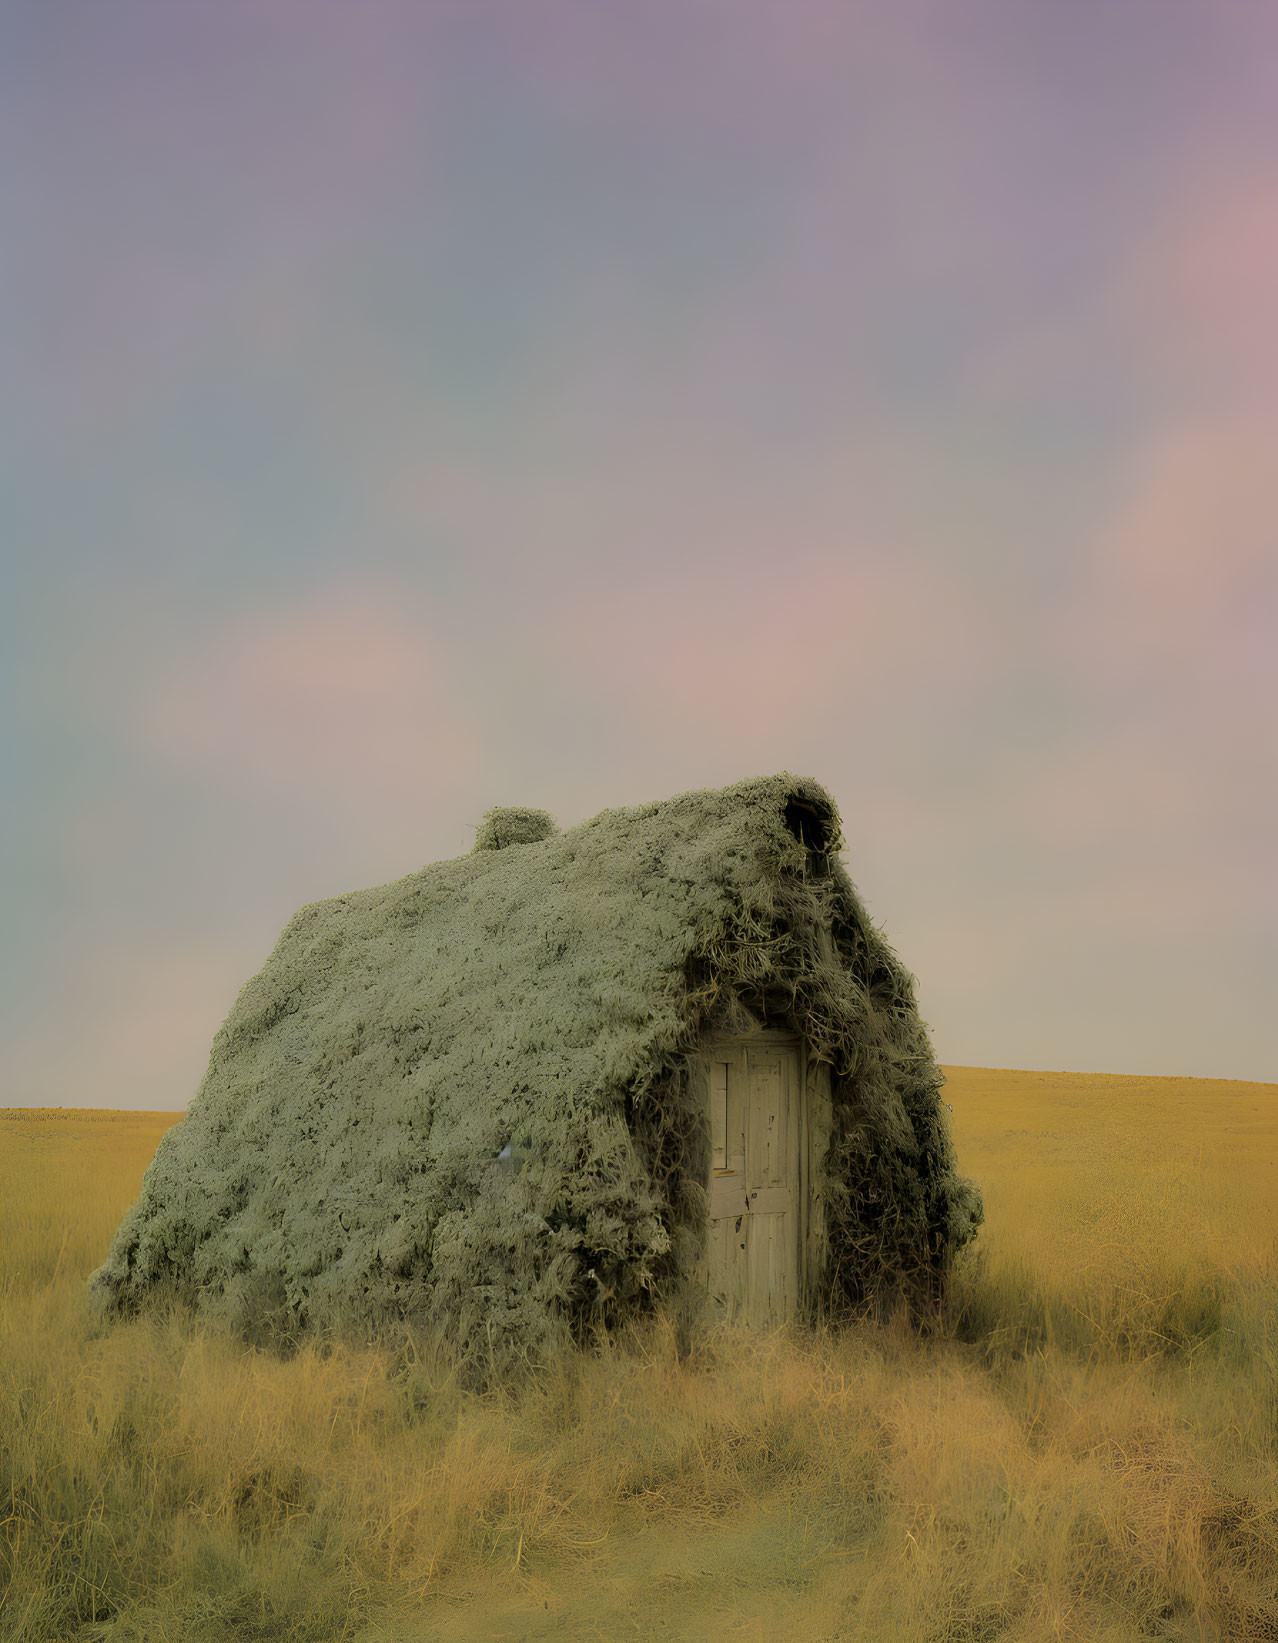 Grass-covered earthen hut with wooden door in tranquil field under pastel sky